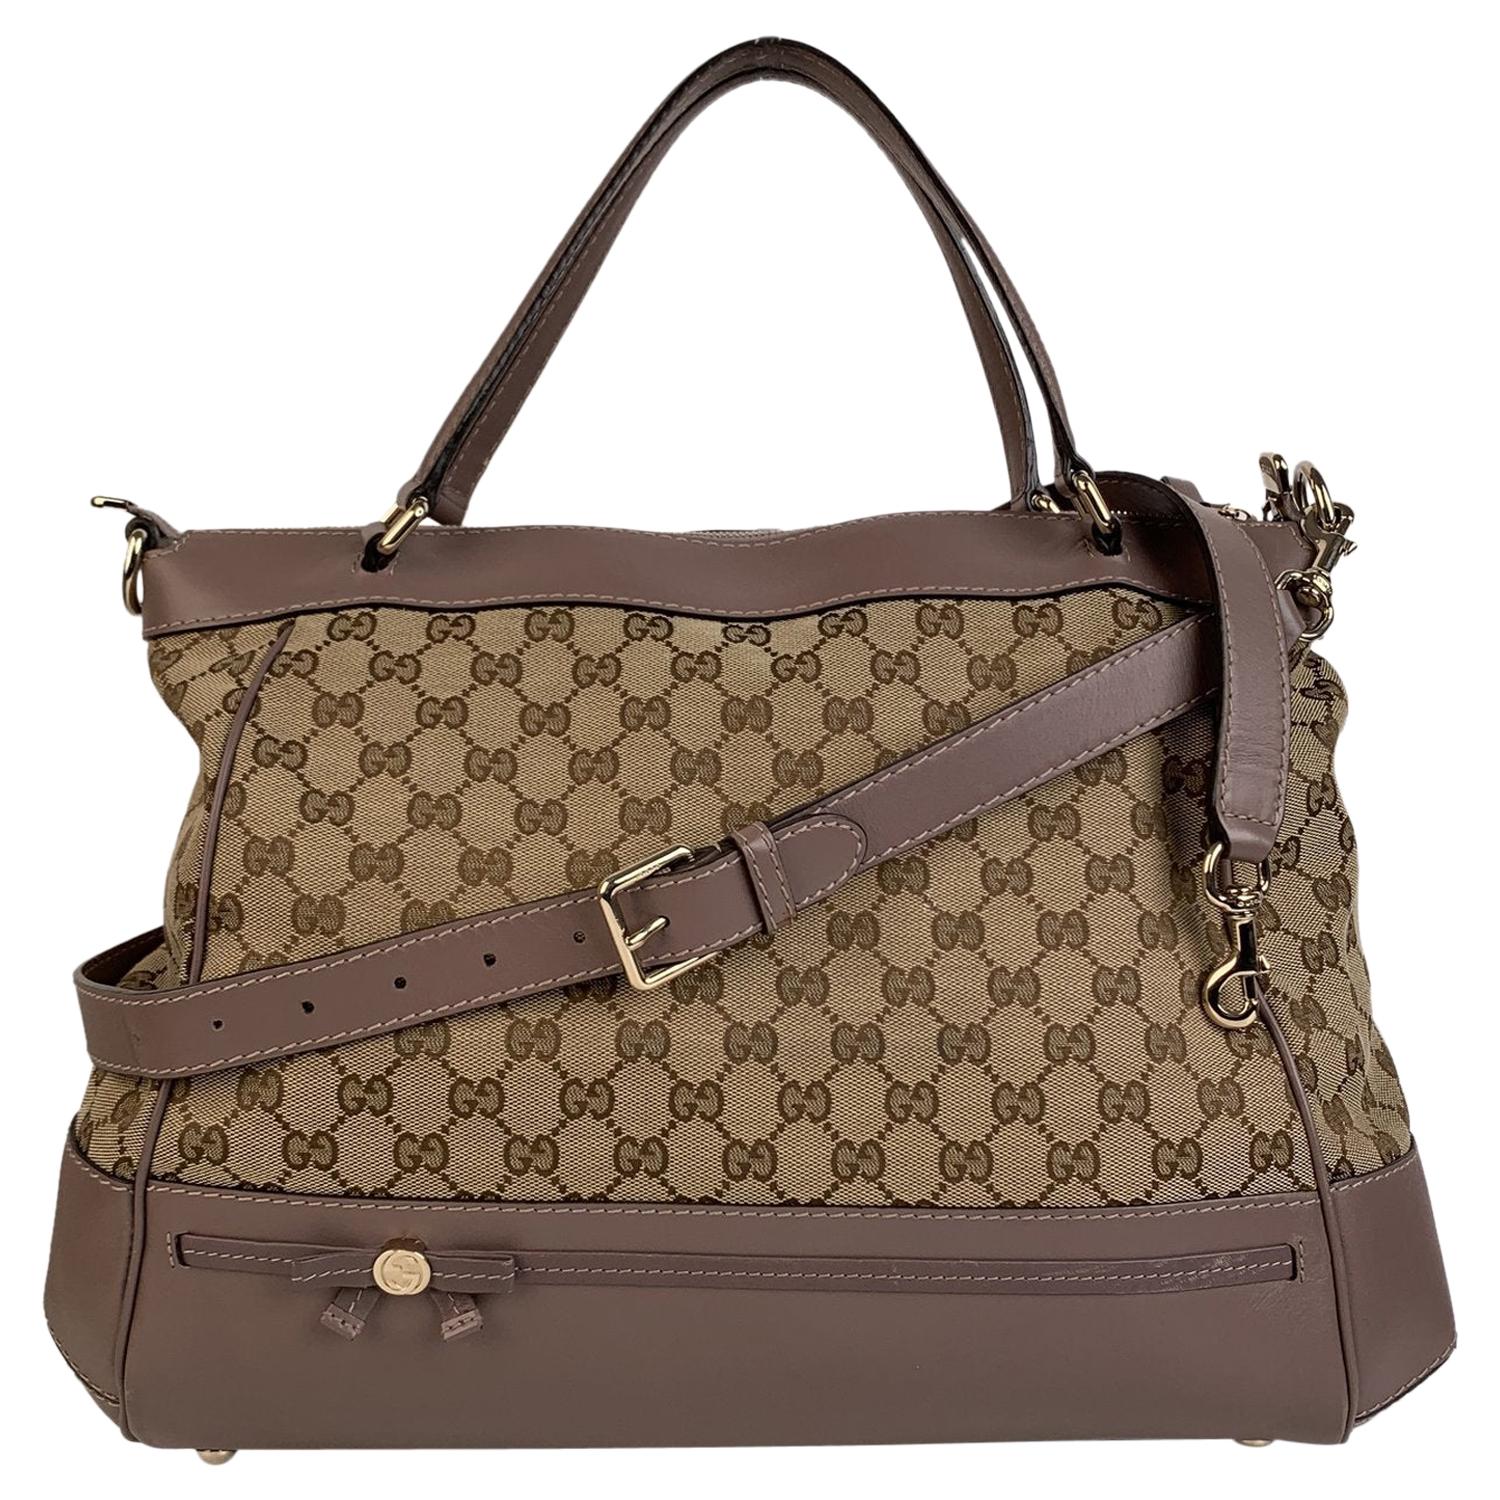 Gucci Monogram Canvas Large Mayfair Tote Bag with Strap